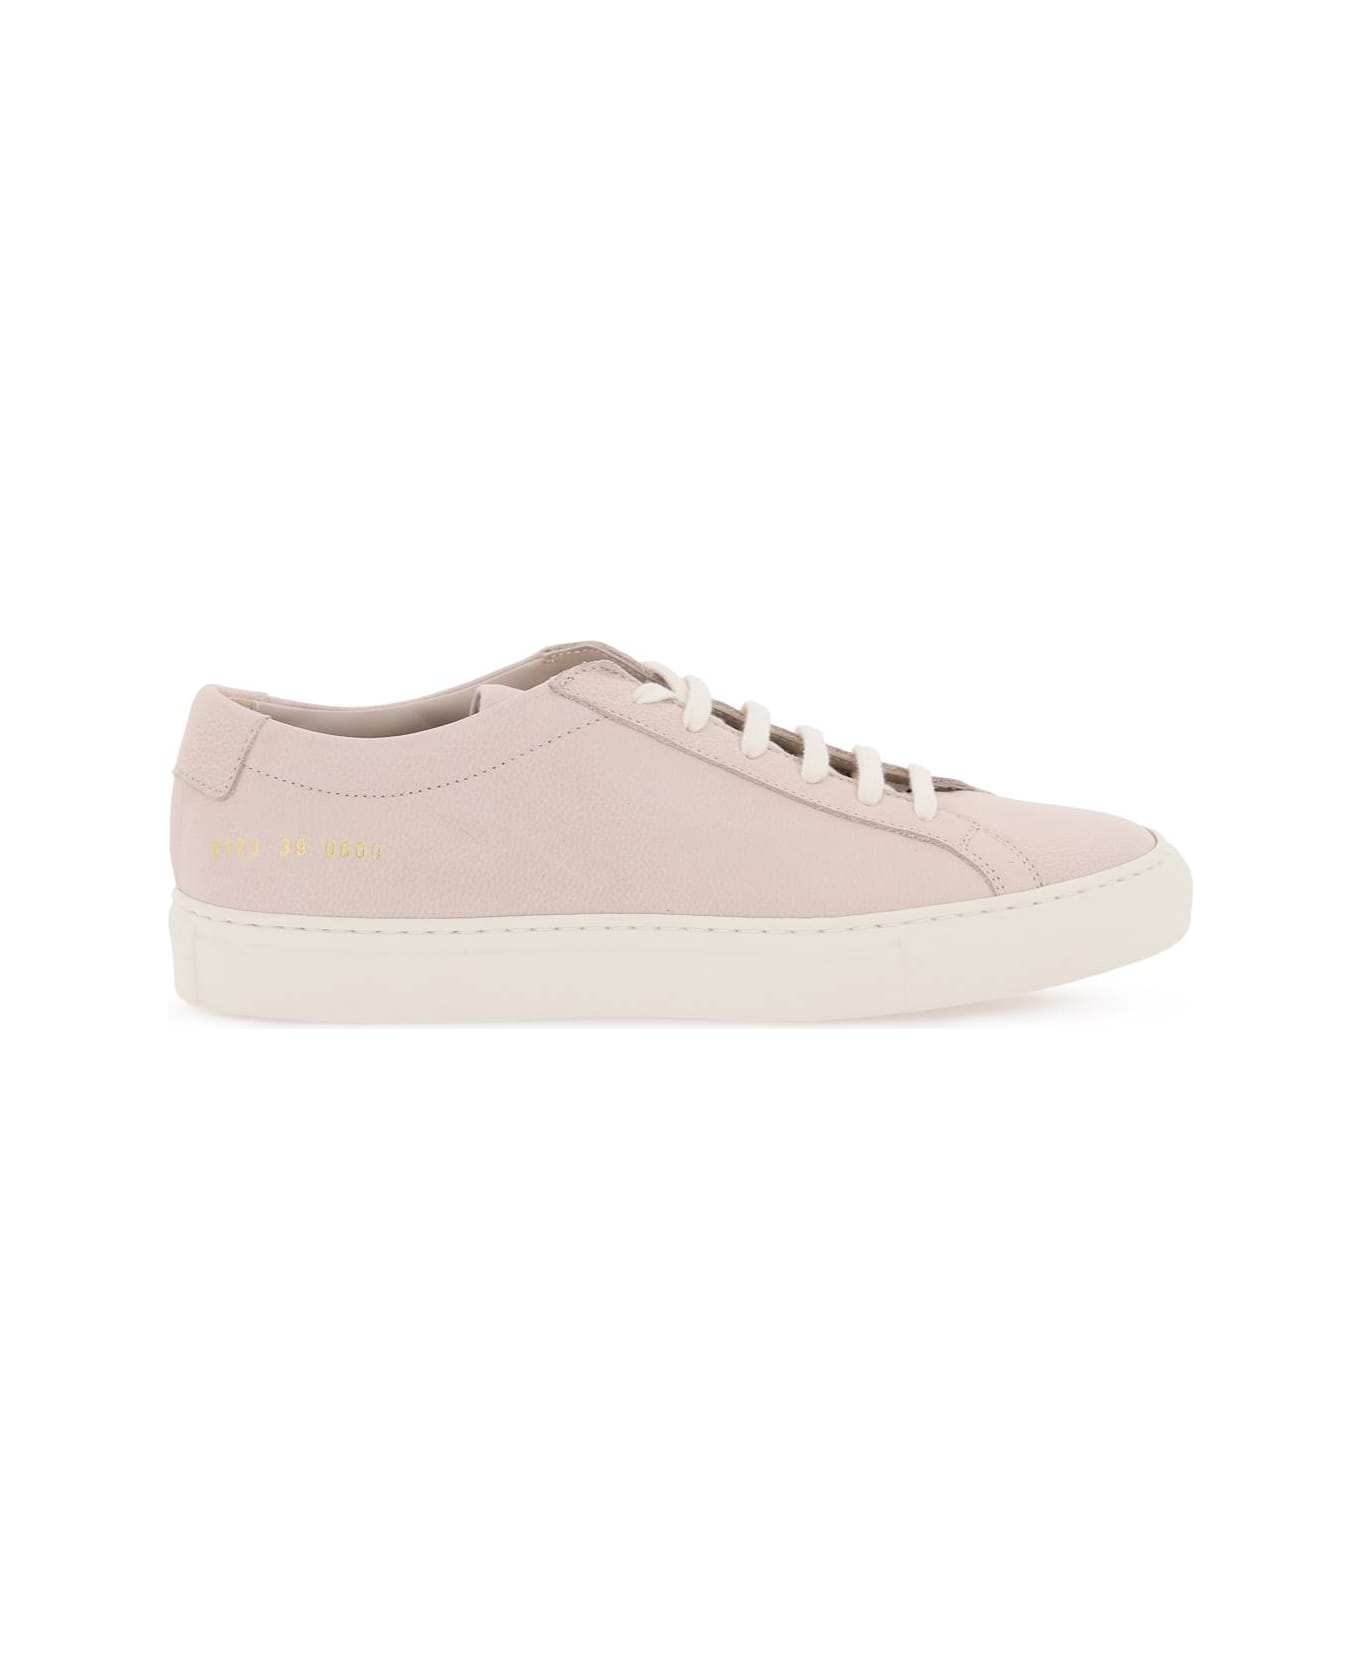 Common Projects Original Achilles Leather Sneakers - NUDE (Pink)